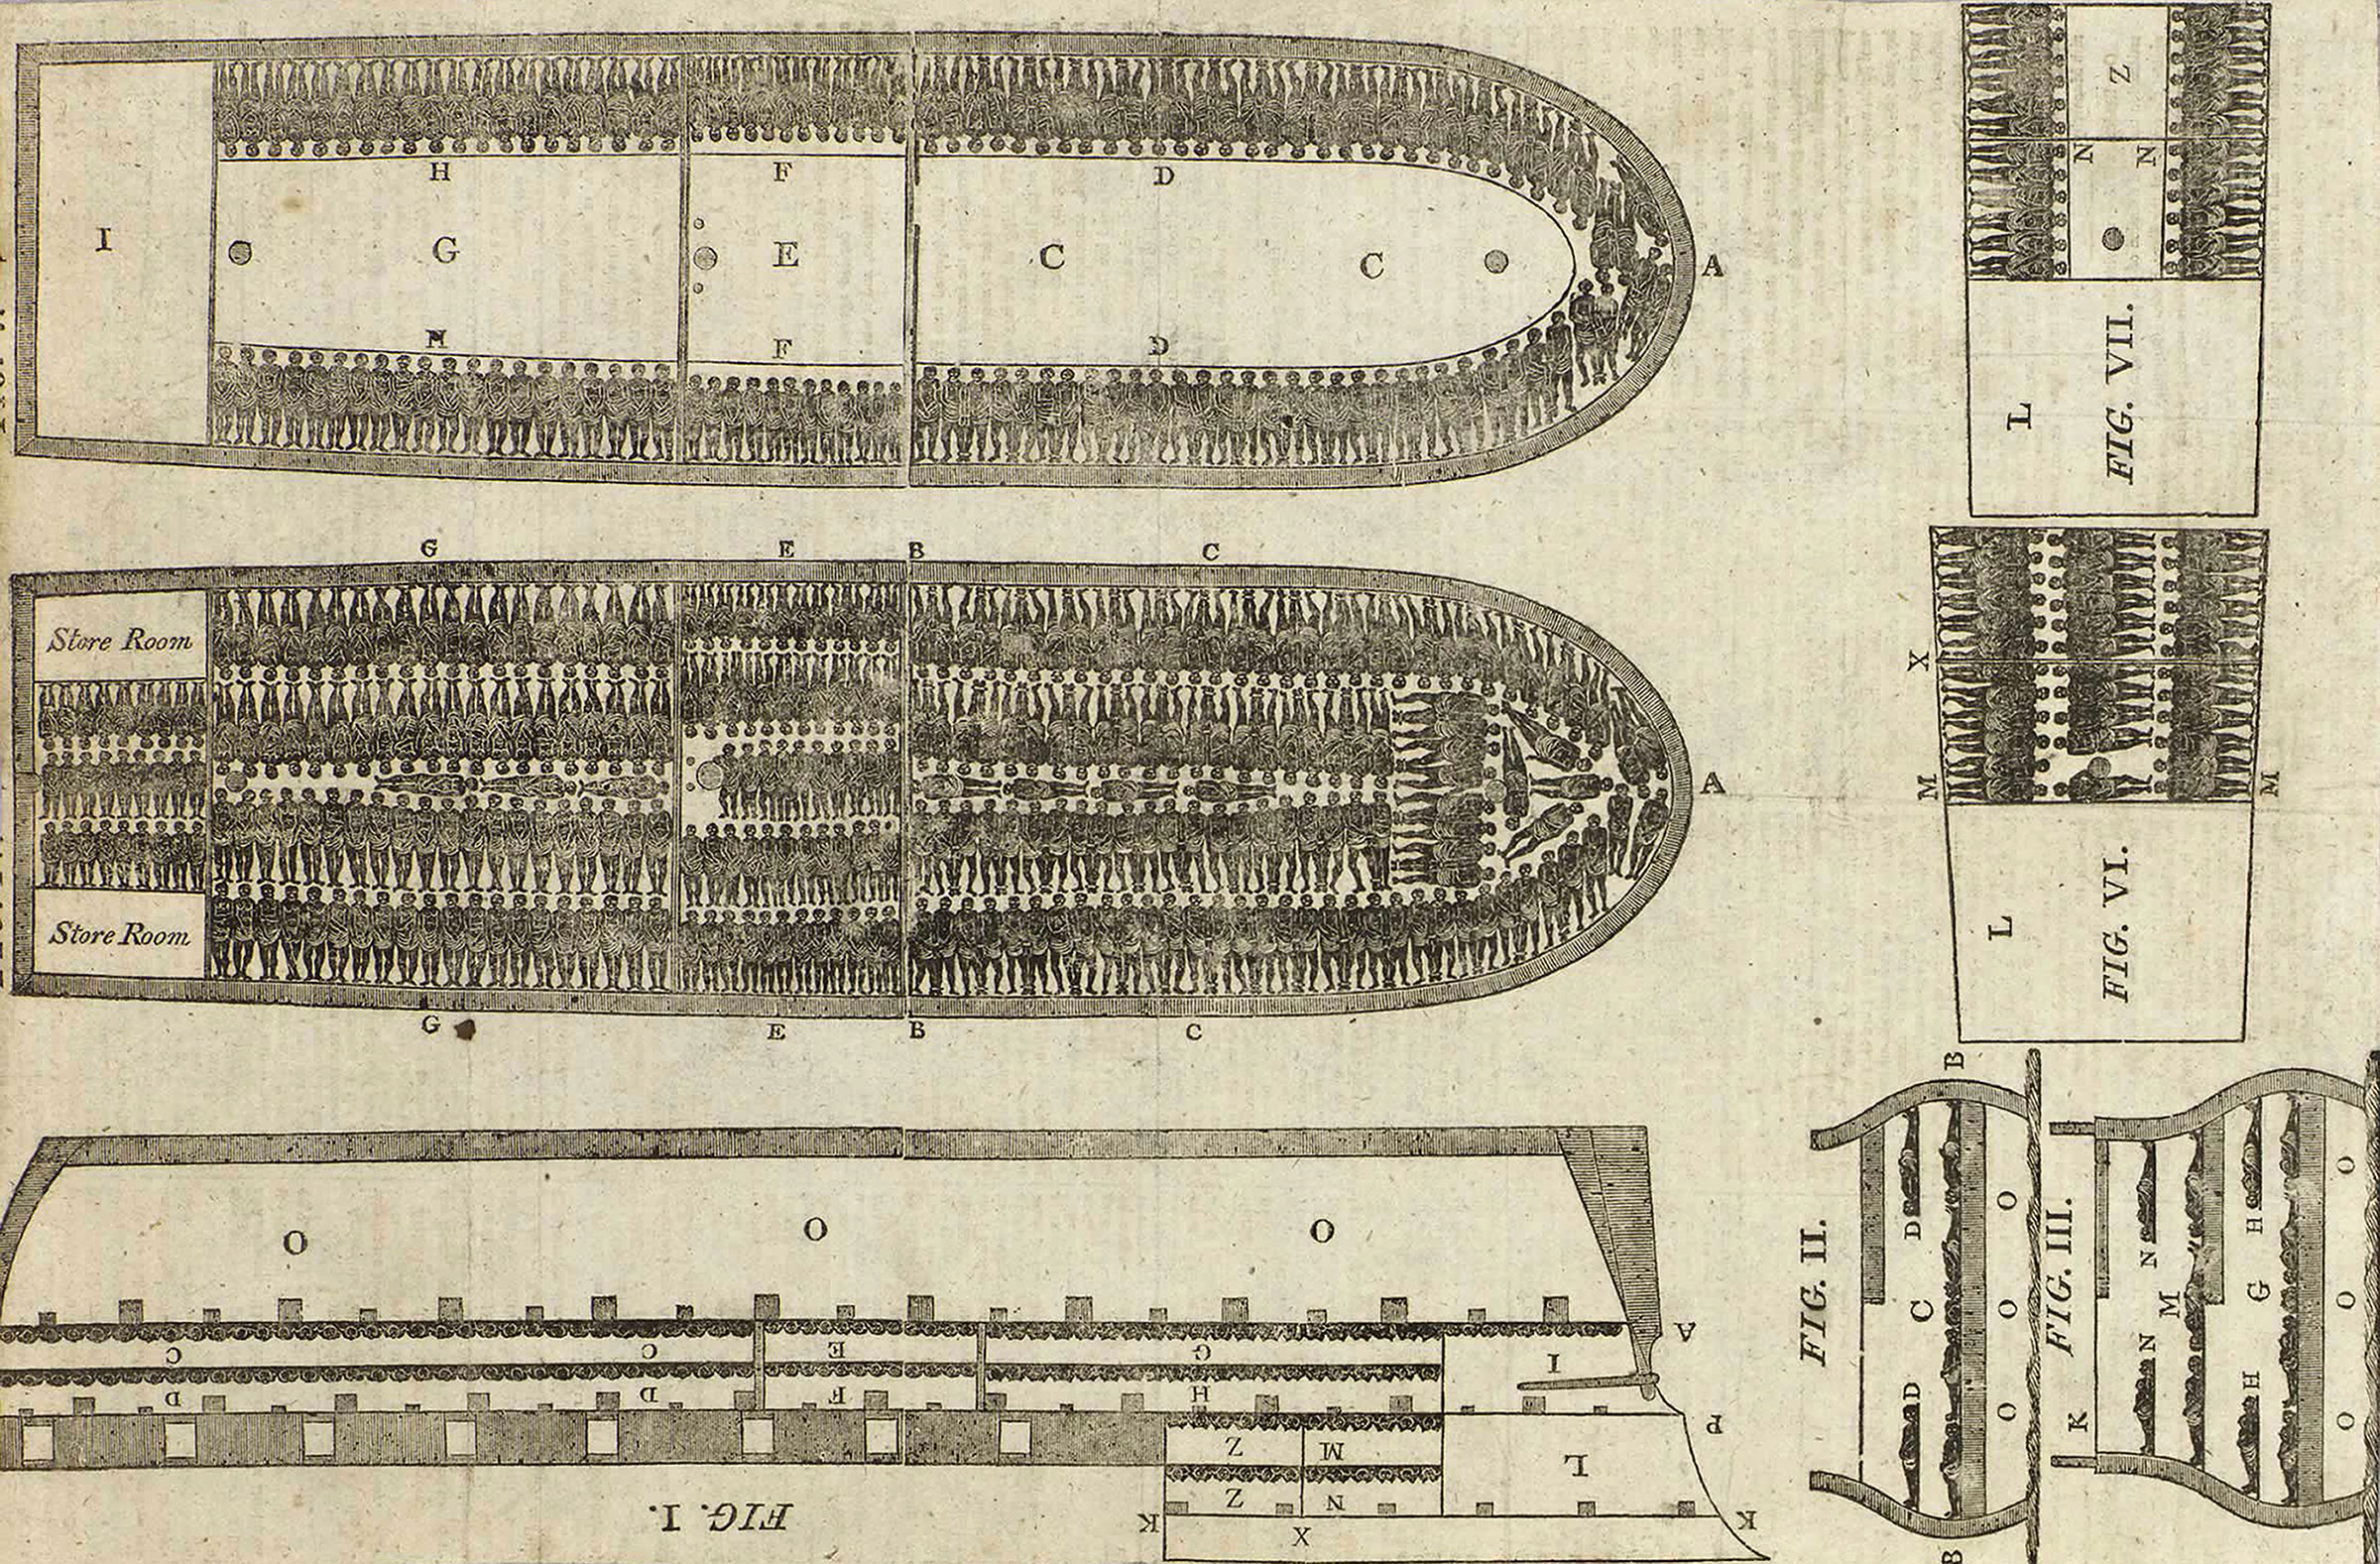 Engraving of the stowage plans of the slave ship Brooks, 1814.